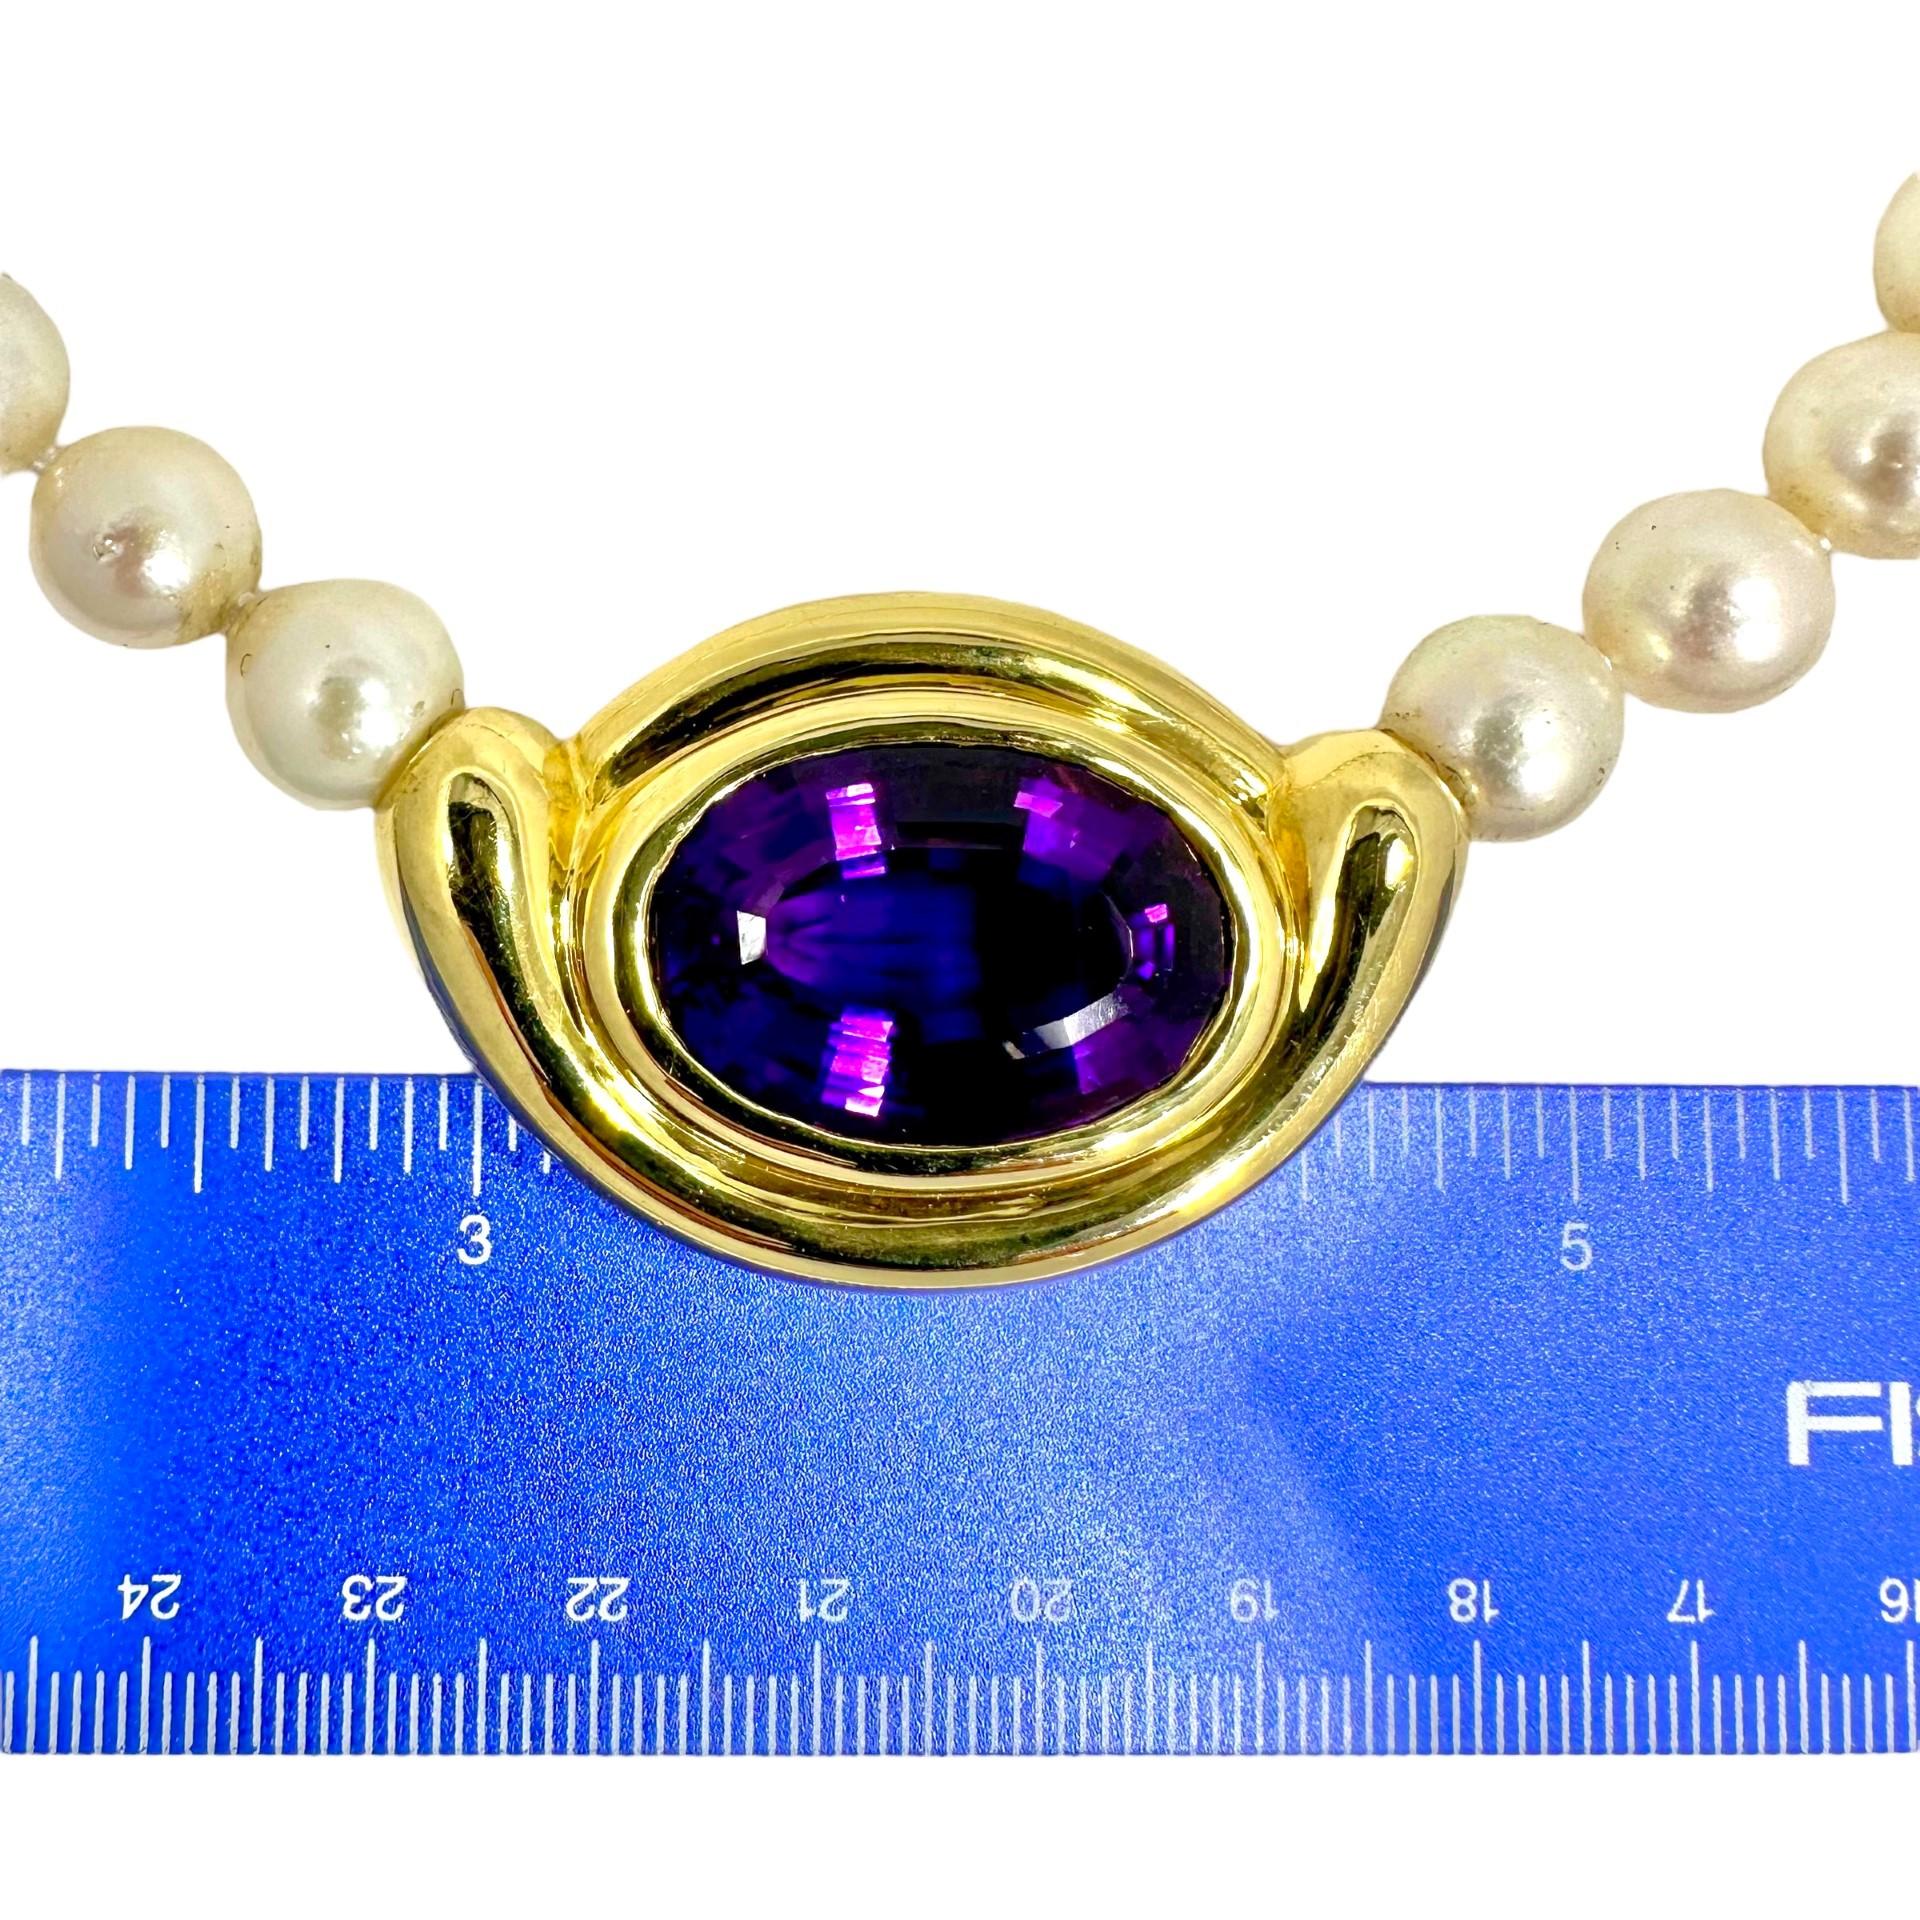 Timeless Vintage 18k Gold Modernist Necklace with Amethyst and Akoya Pearls In Good Condition For Sale In Palm Beach, FL